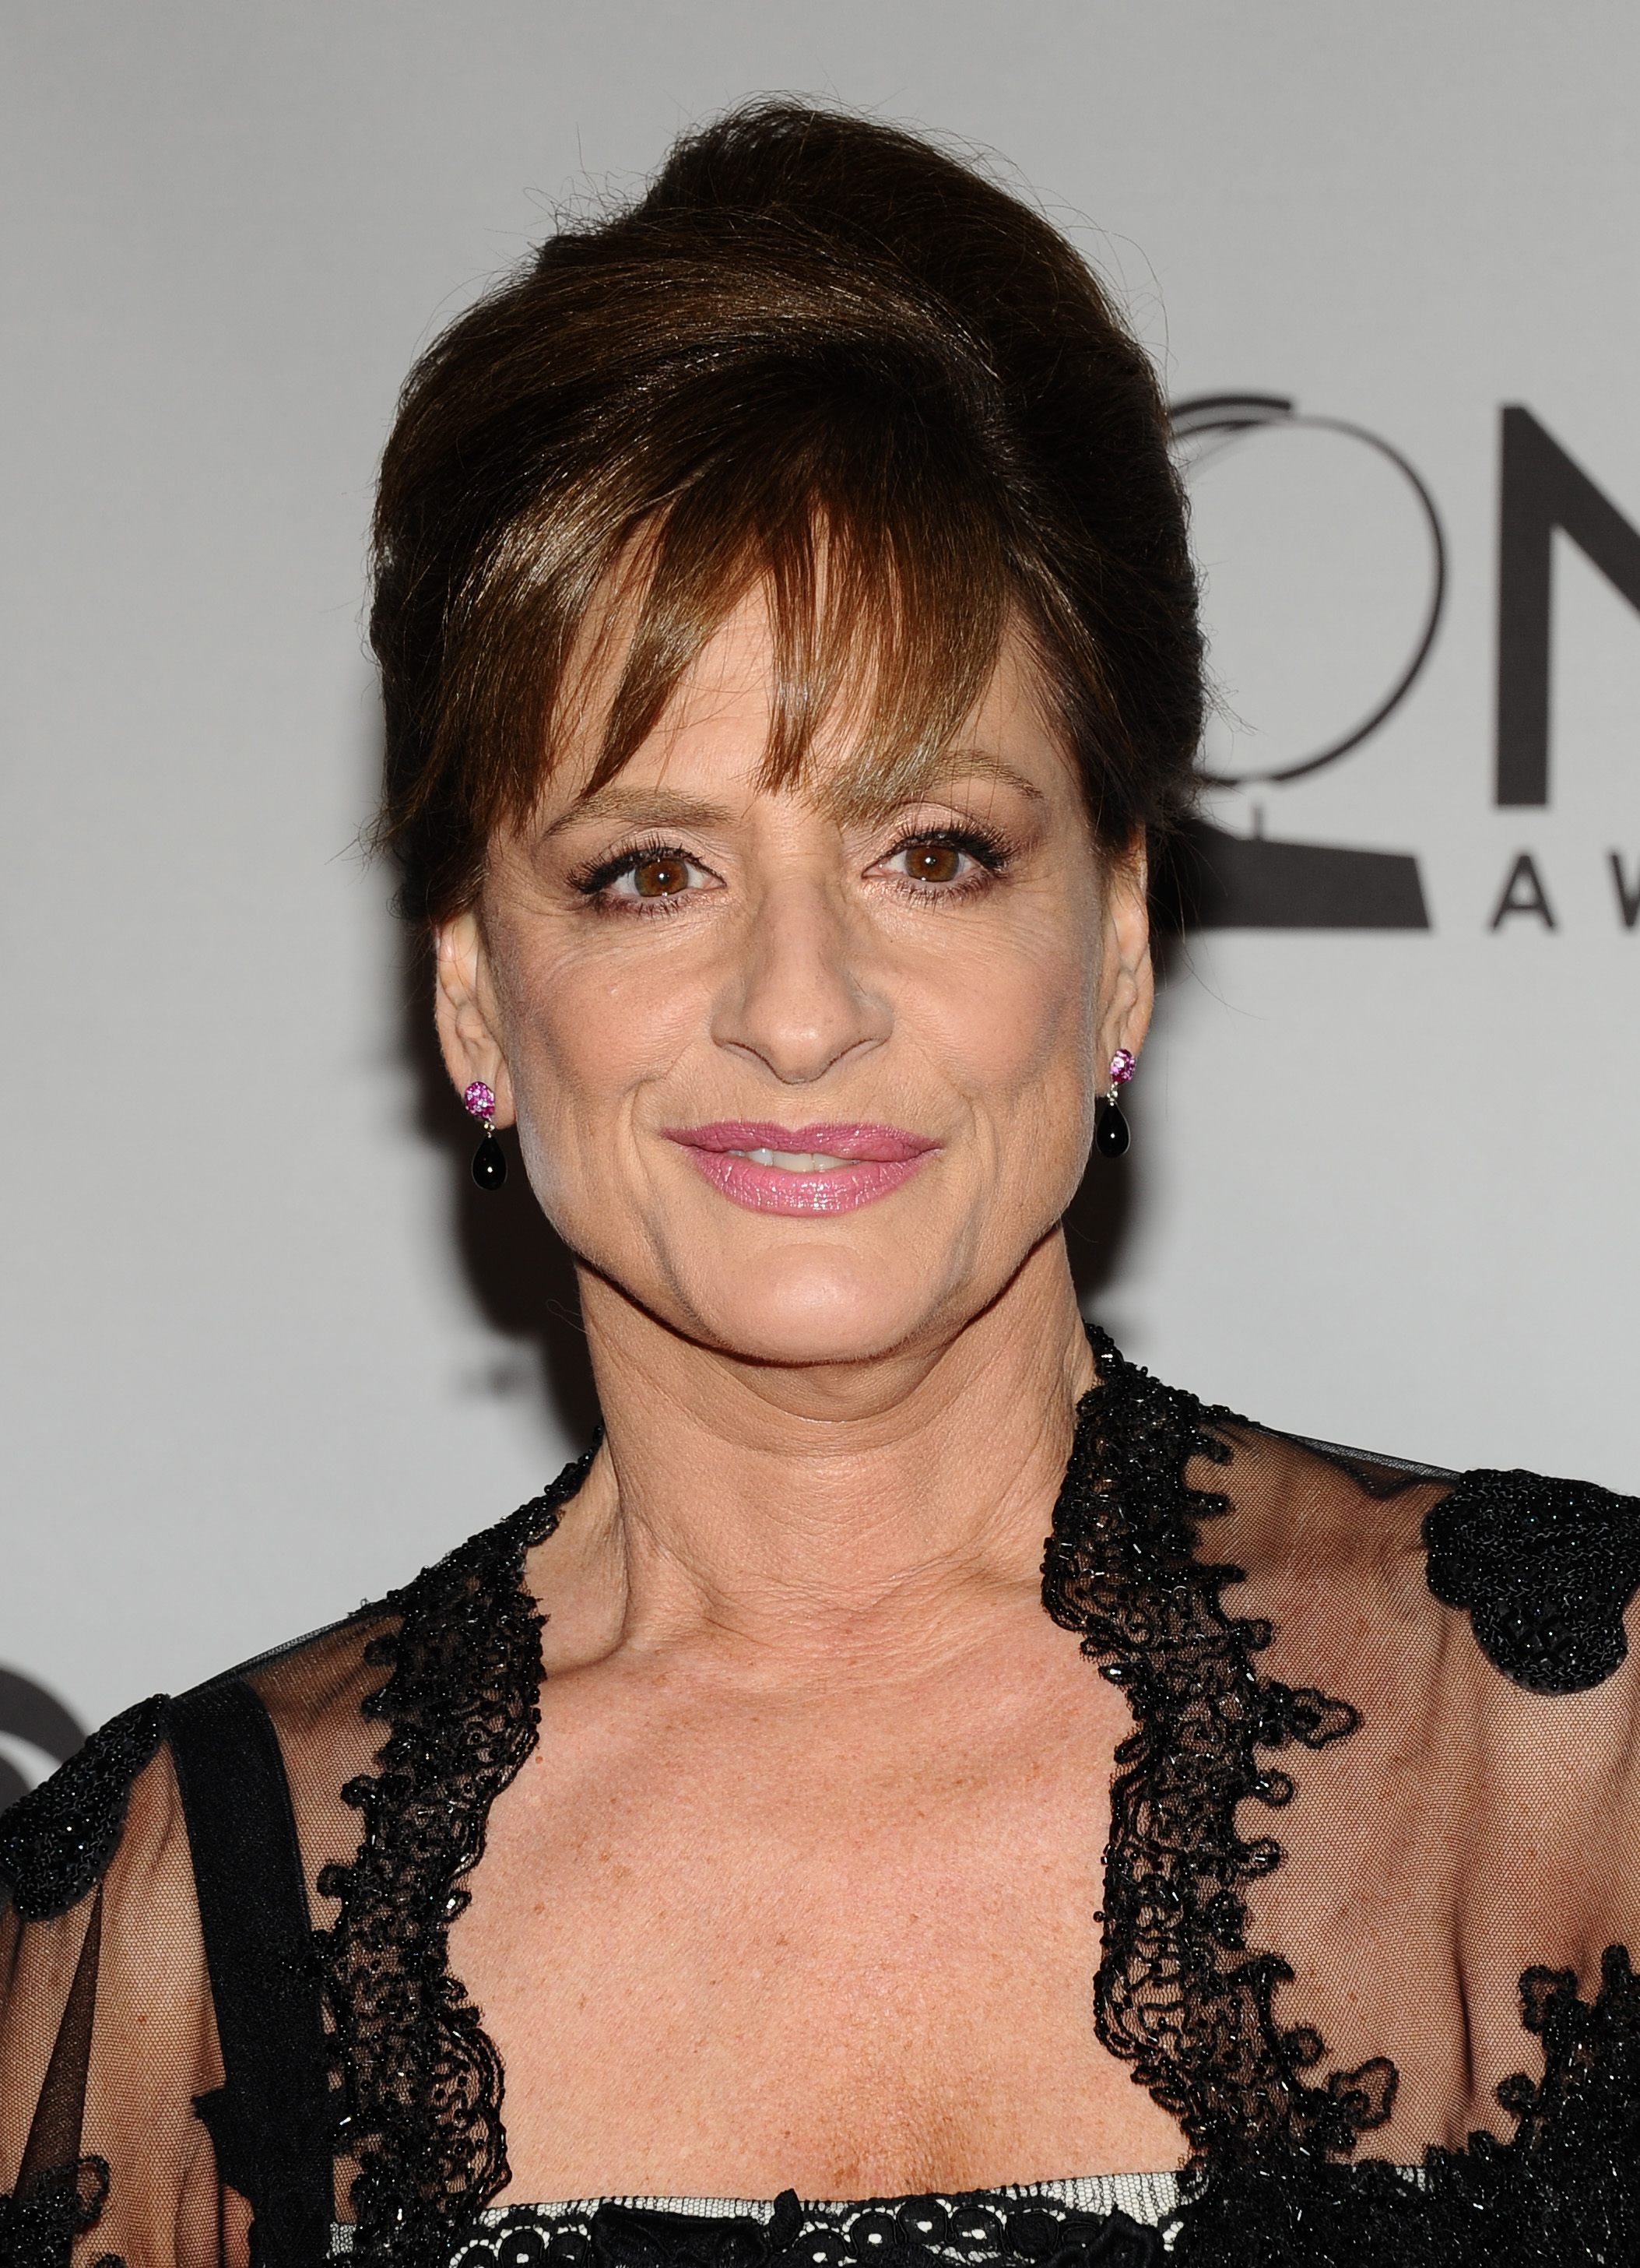 Patti LuPone talks about ringing phones and Broadway's woes Breitbart